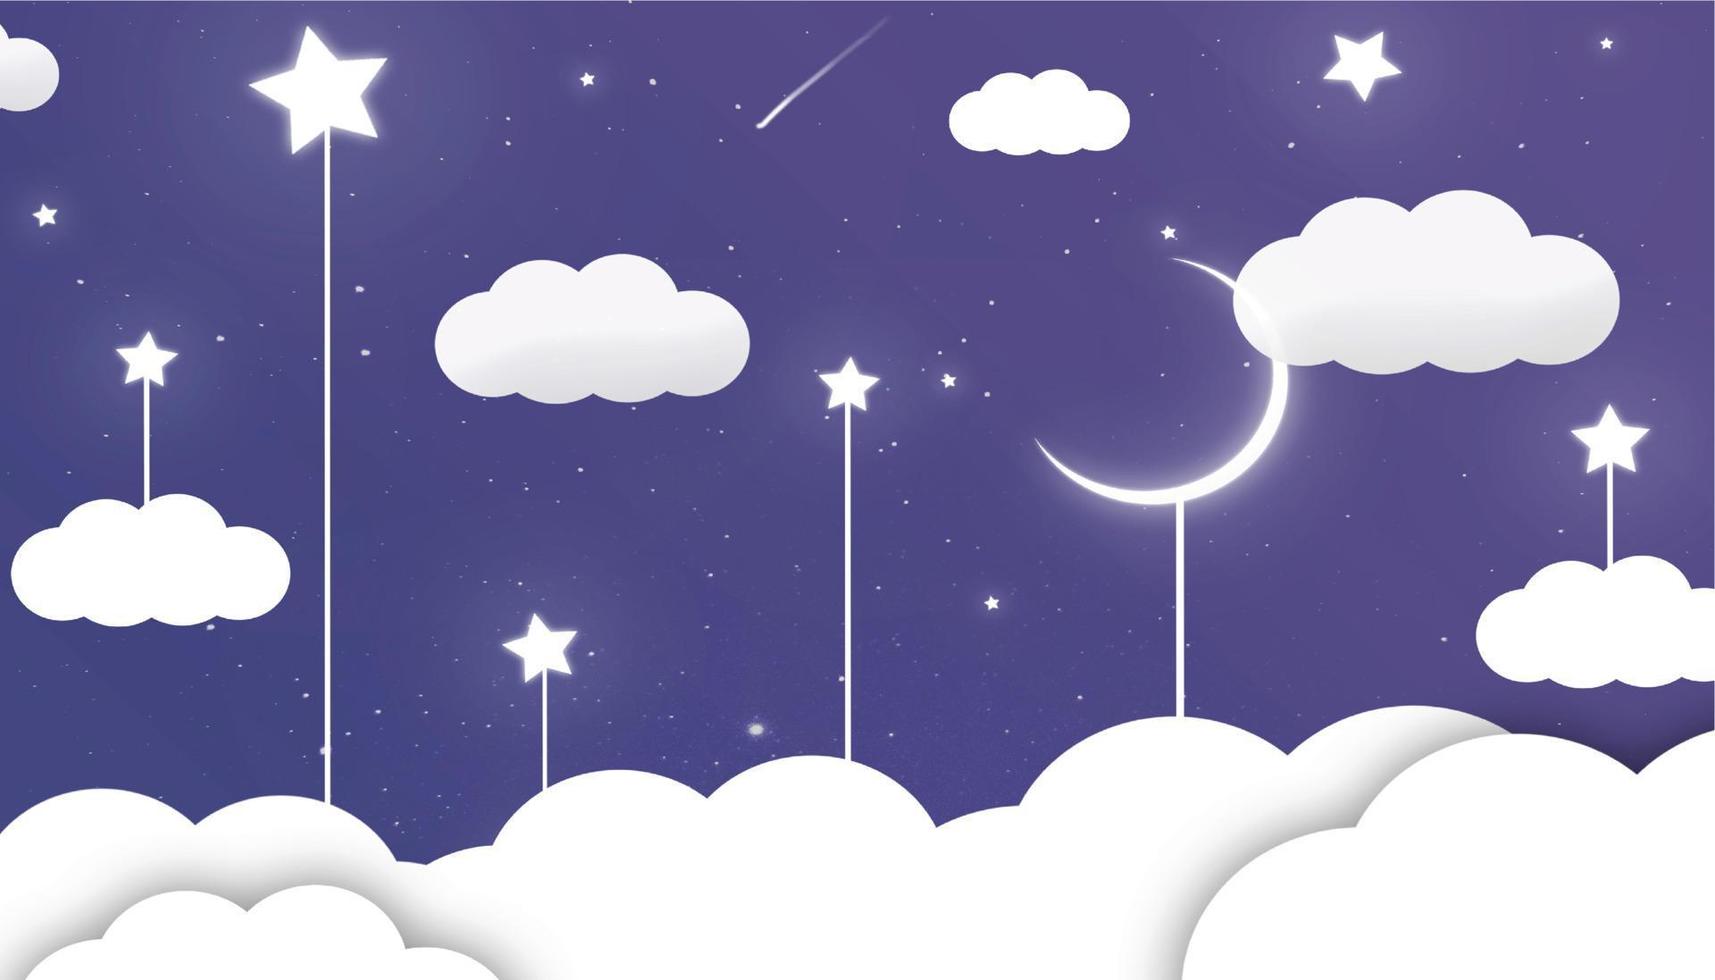 Blue sky with clouds and shiny stars and moon vector illustration, simple night sky illustration